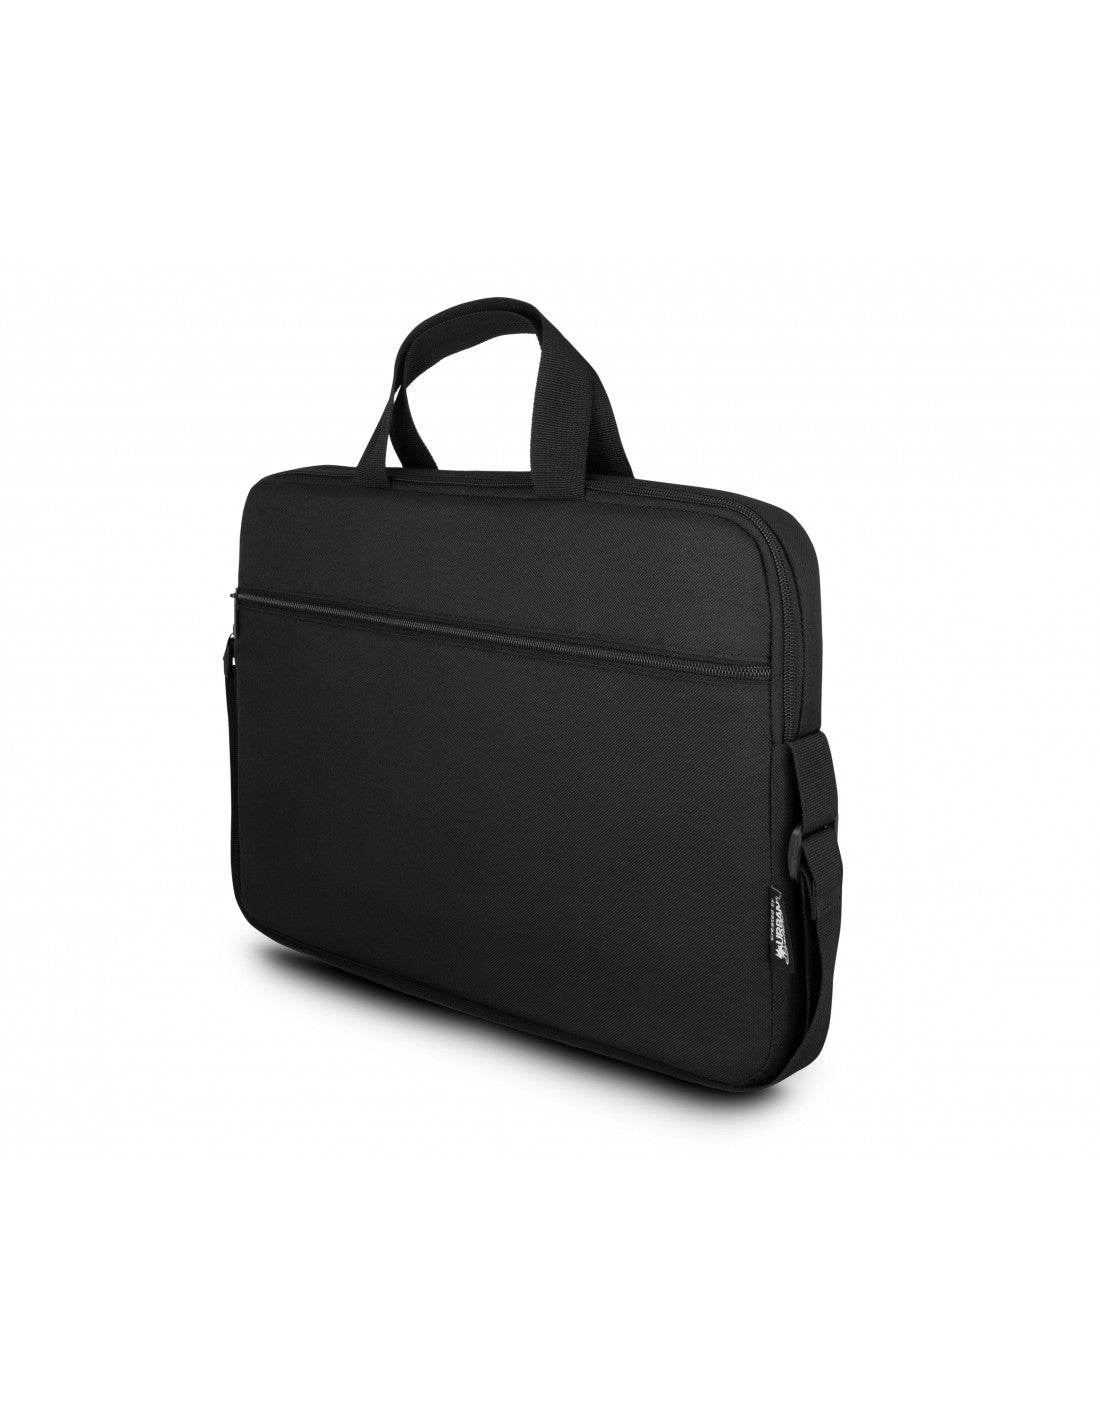 NYLEE: FLEXIBLE CASE FOR COMPUTER 15.6"